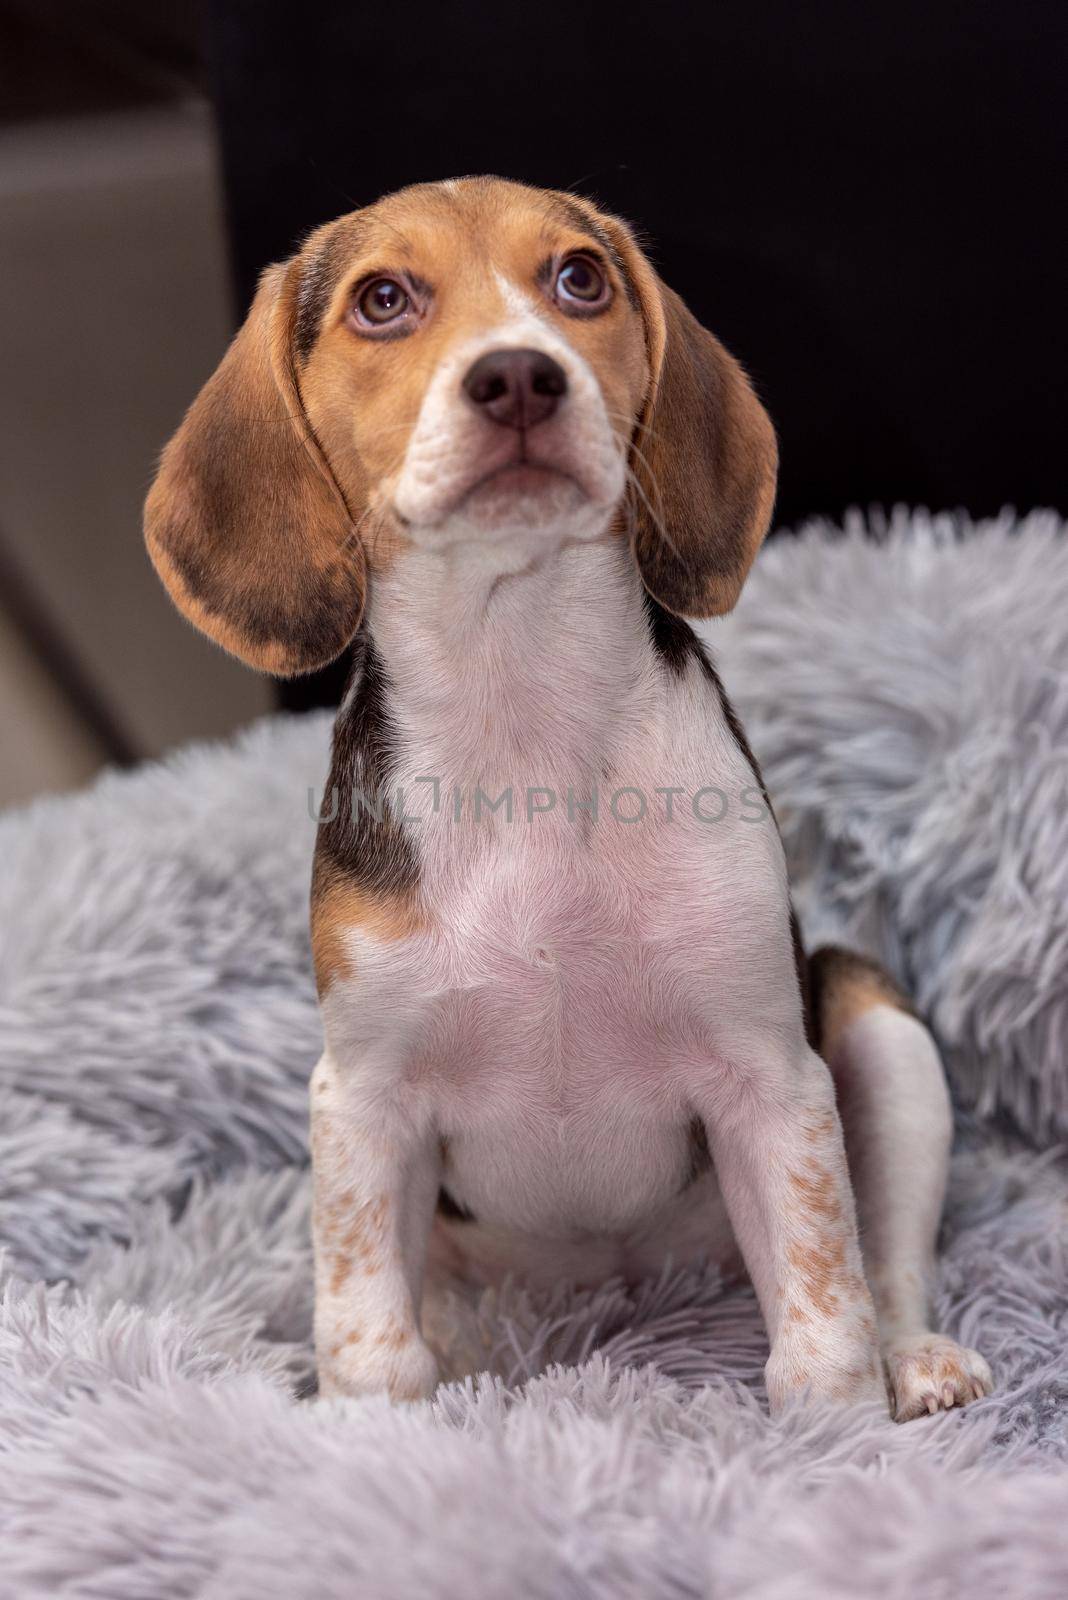 Beagle puppy resting on a couch.